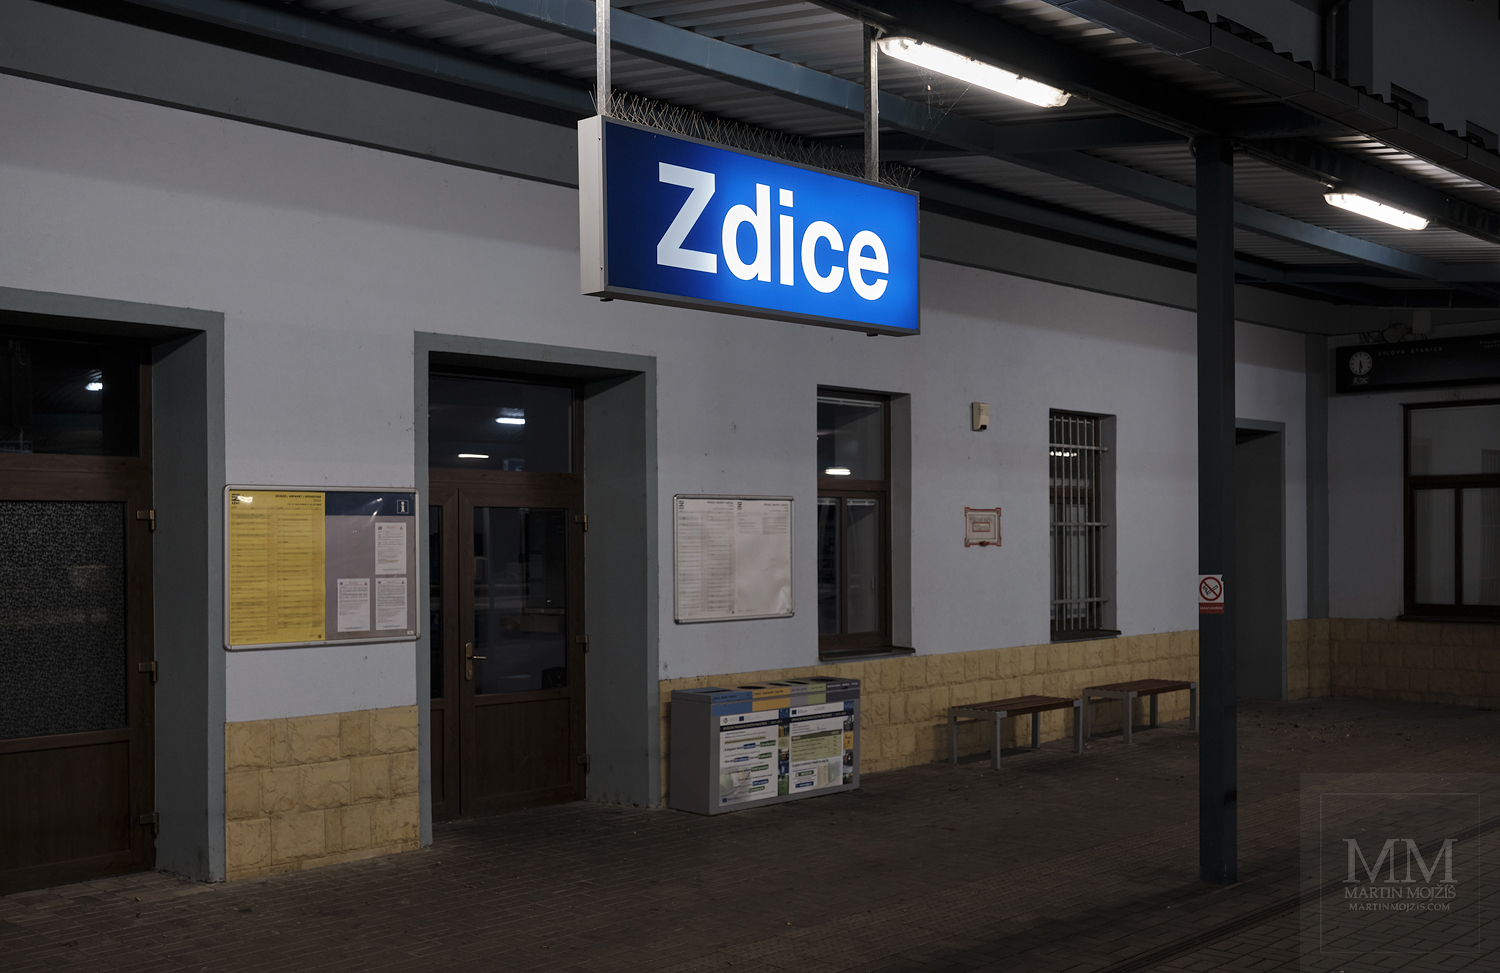 Railway station Zdice after two years - part 1.